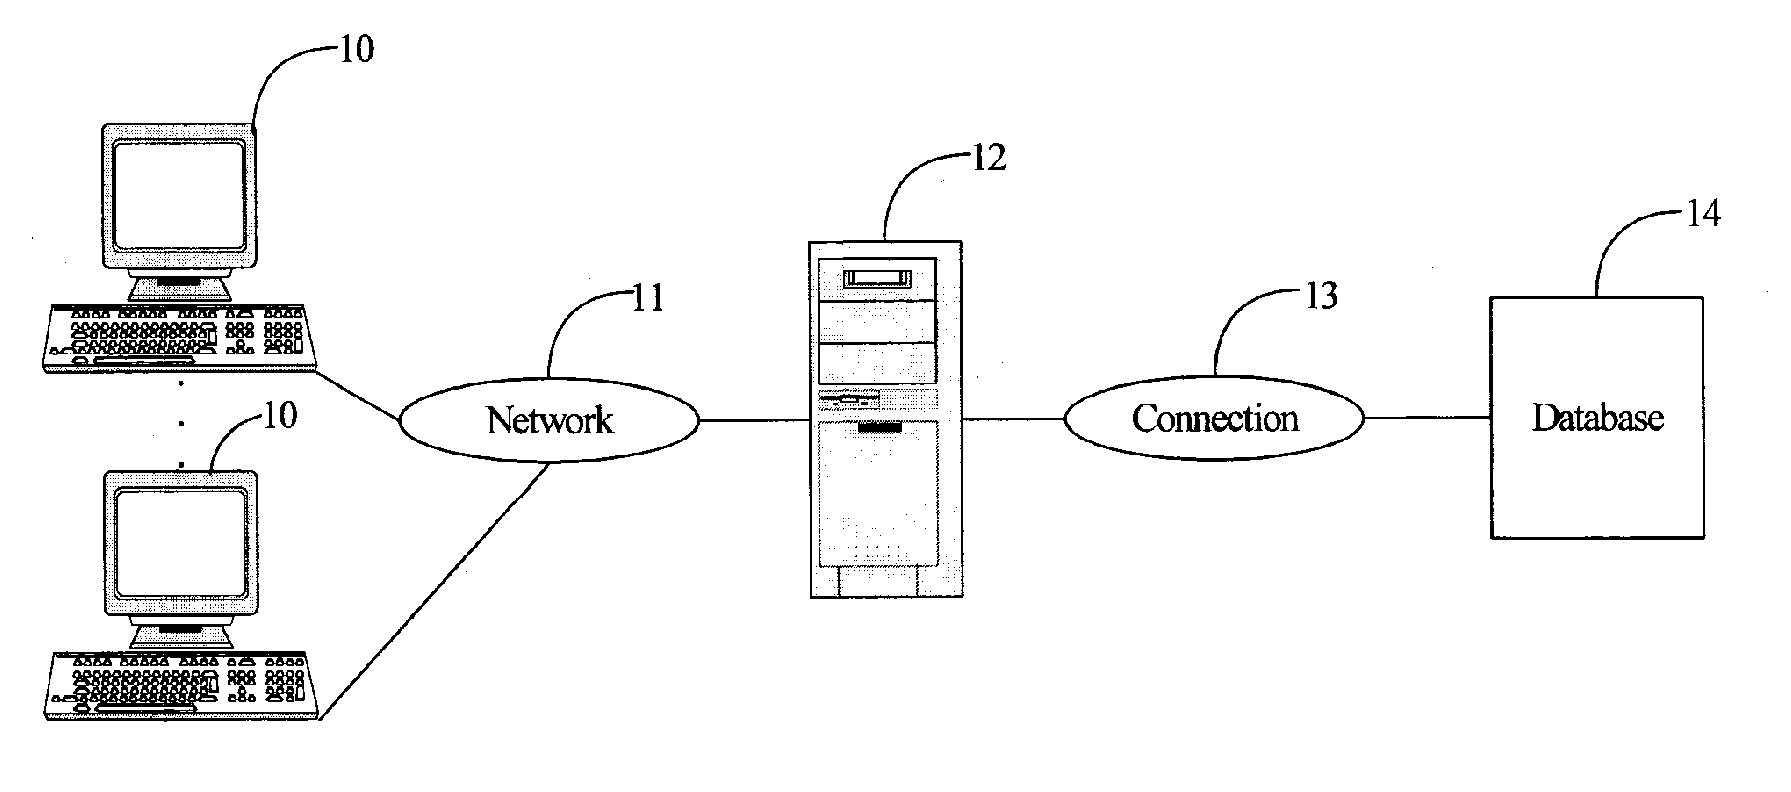 System and method for controlling a service to use a resource